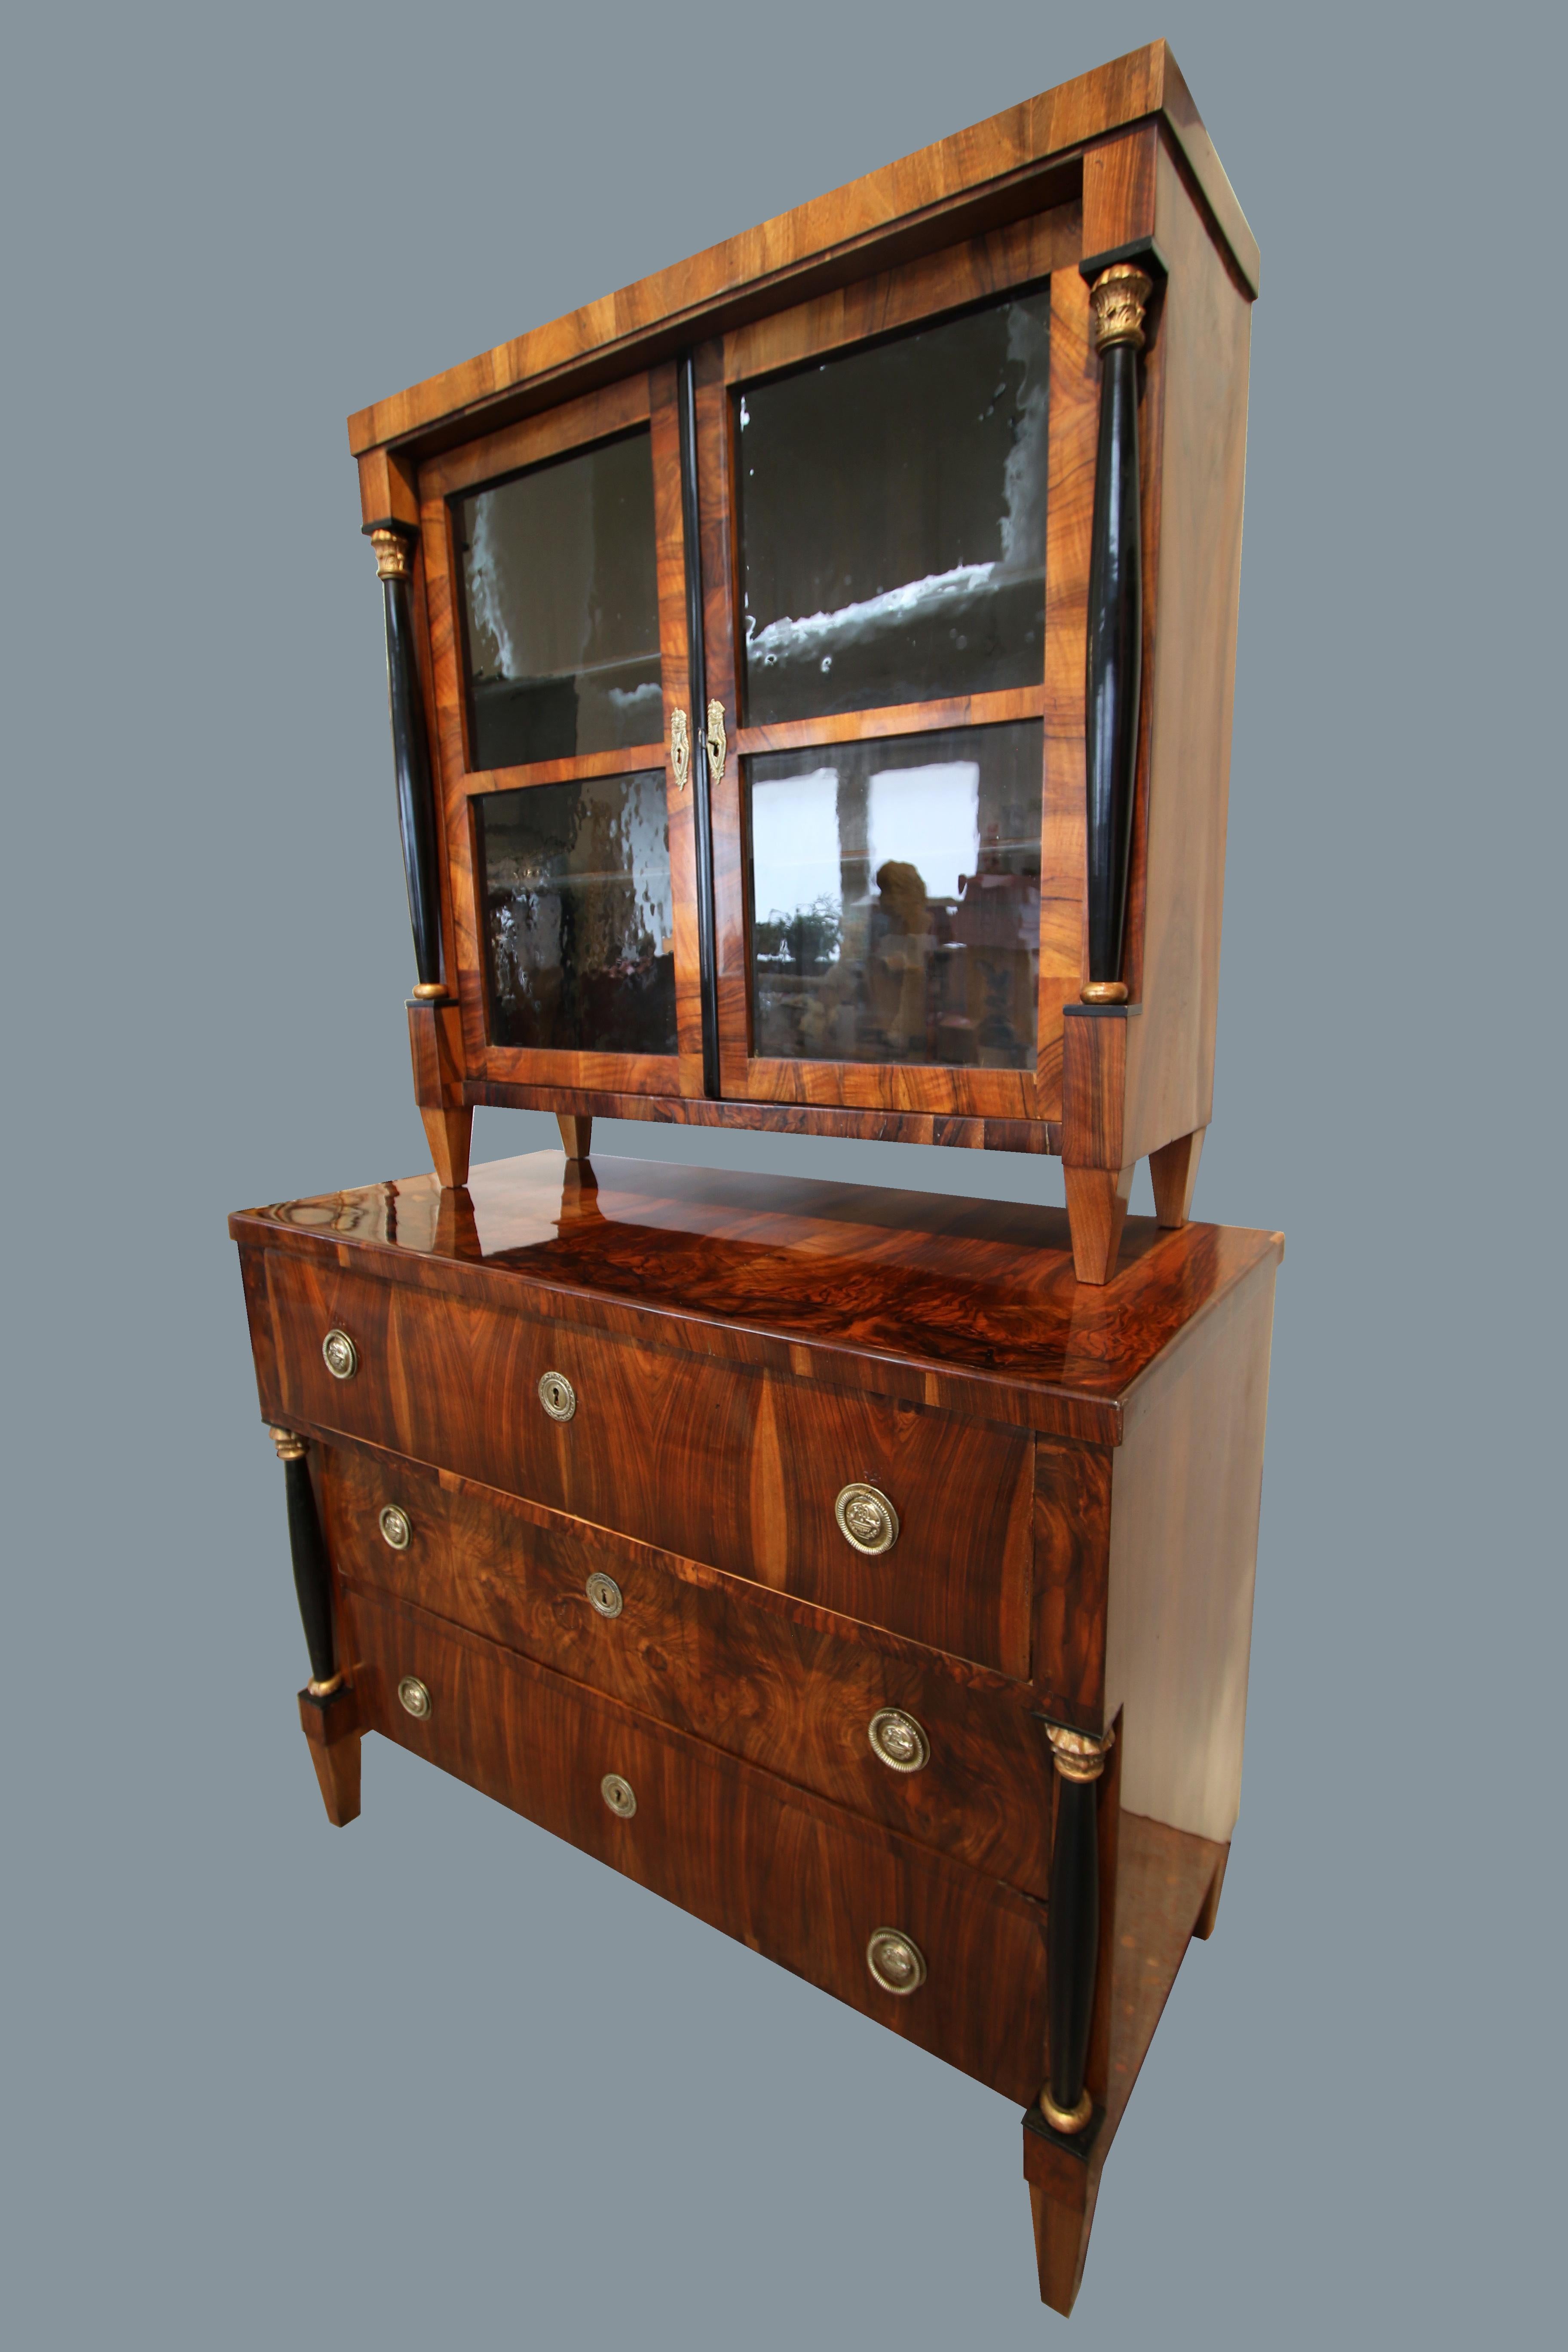 Hello,
We would like to offer you this truly exquisite, early Biedermeier walnut chest of three drawers and vitrine. The piece was made in Vienna circa 1820-25.

Viennese Biedermeier is distinguished by their sophisticated proportions, rare and